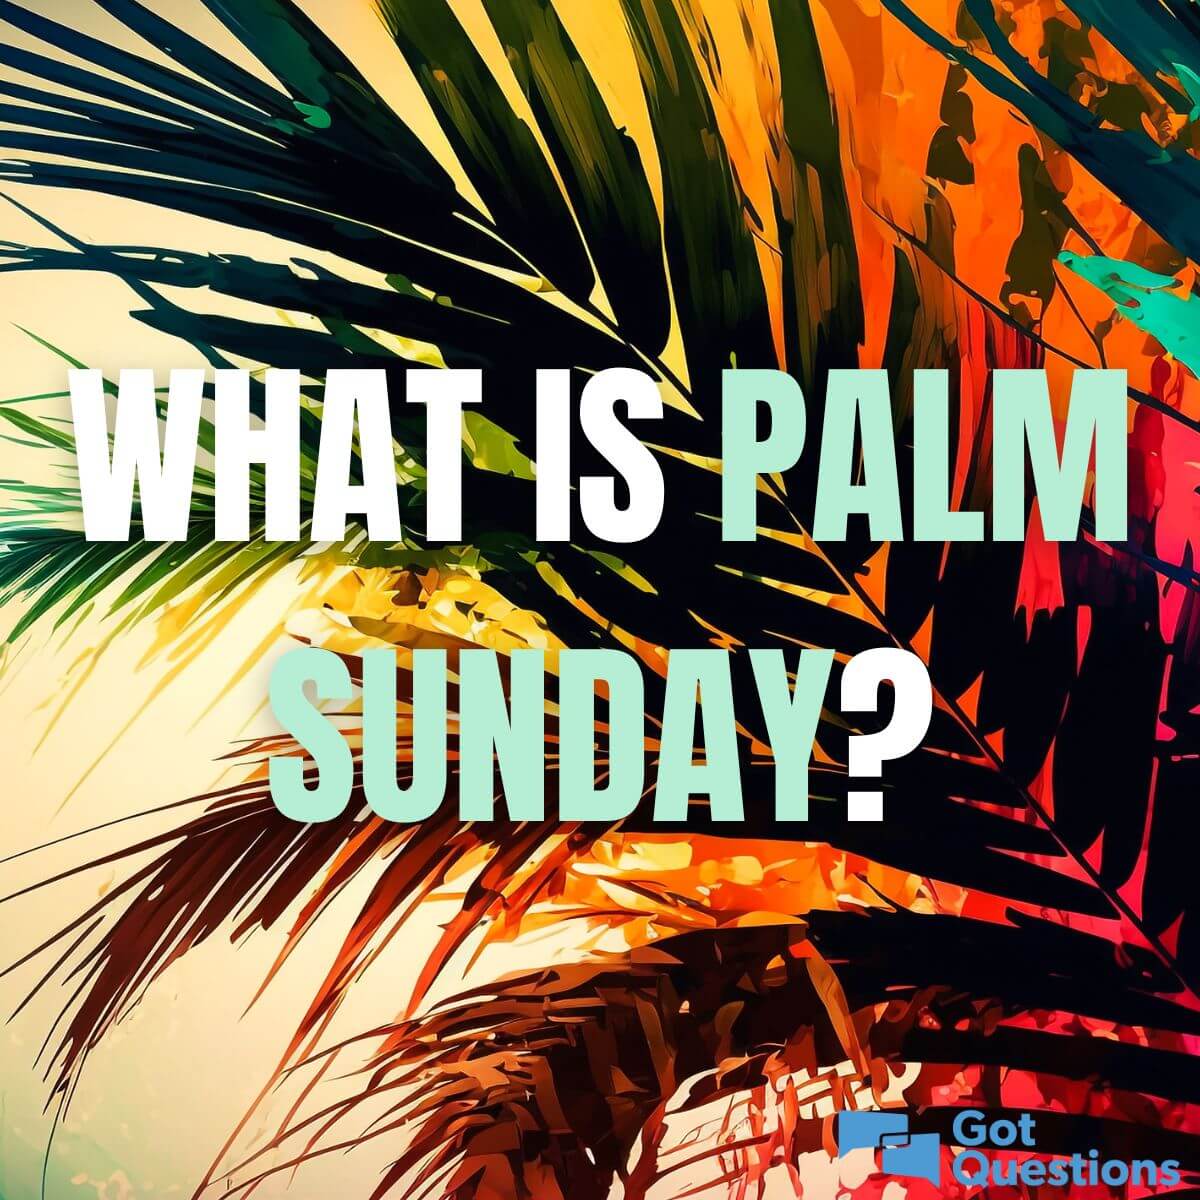 What is Palm Sunday?